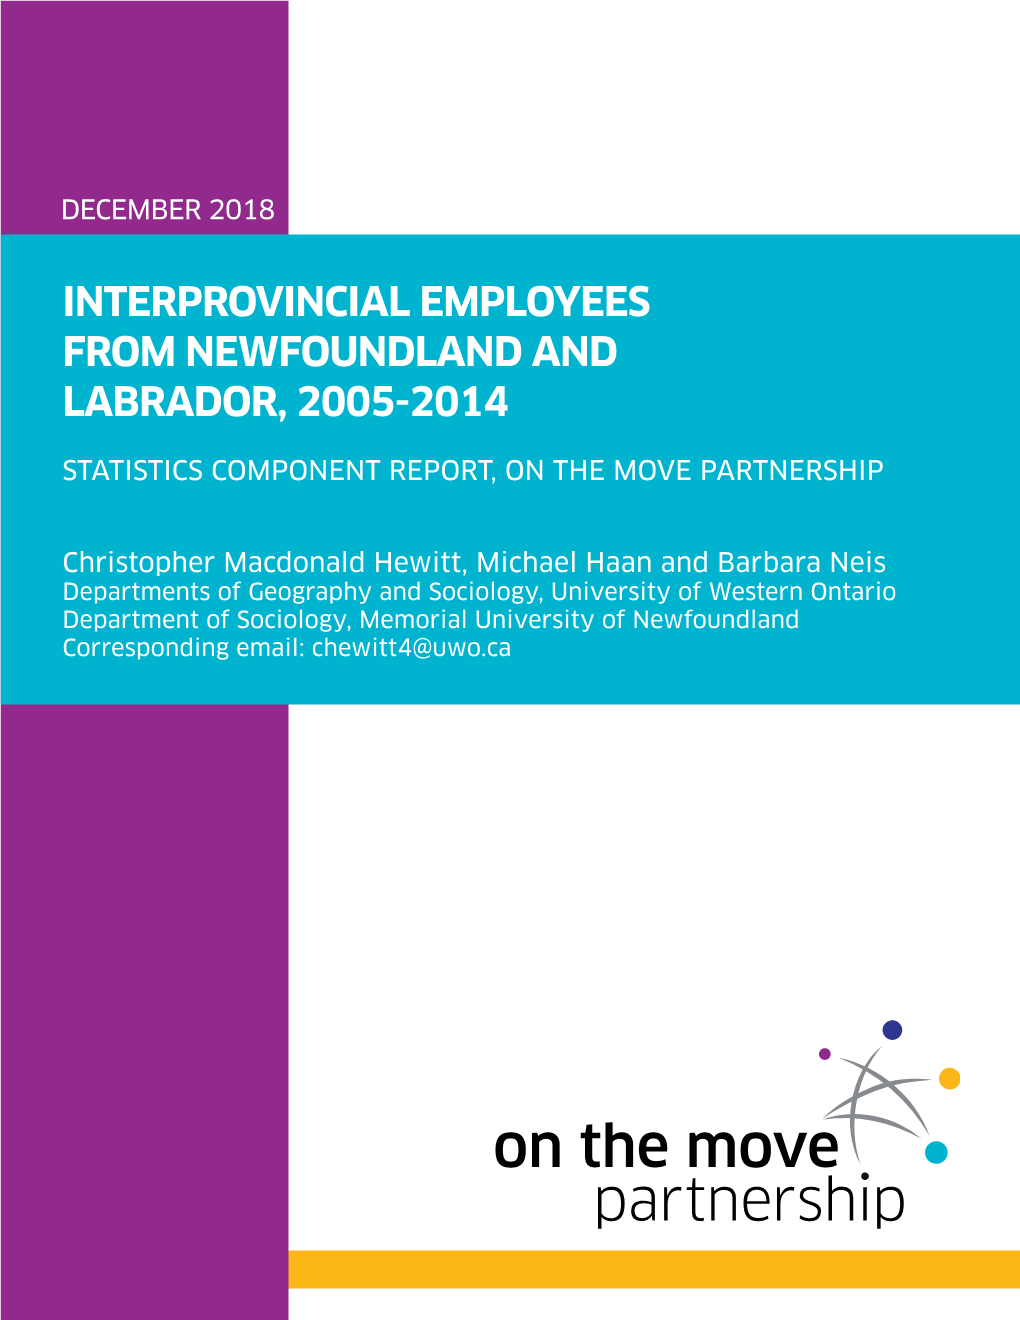 Interprovincial Employees from Newfoundland and Labrador, 2005‑2014